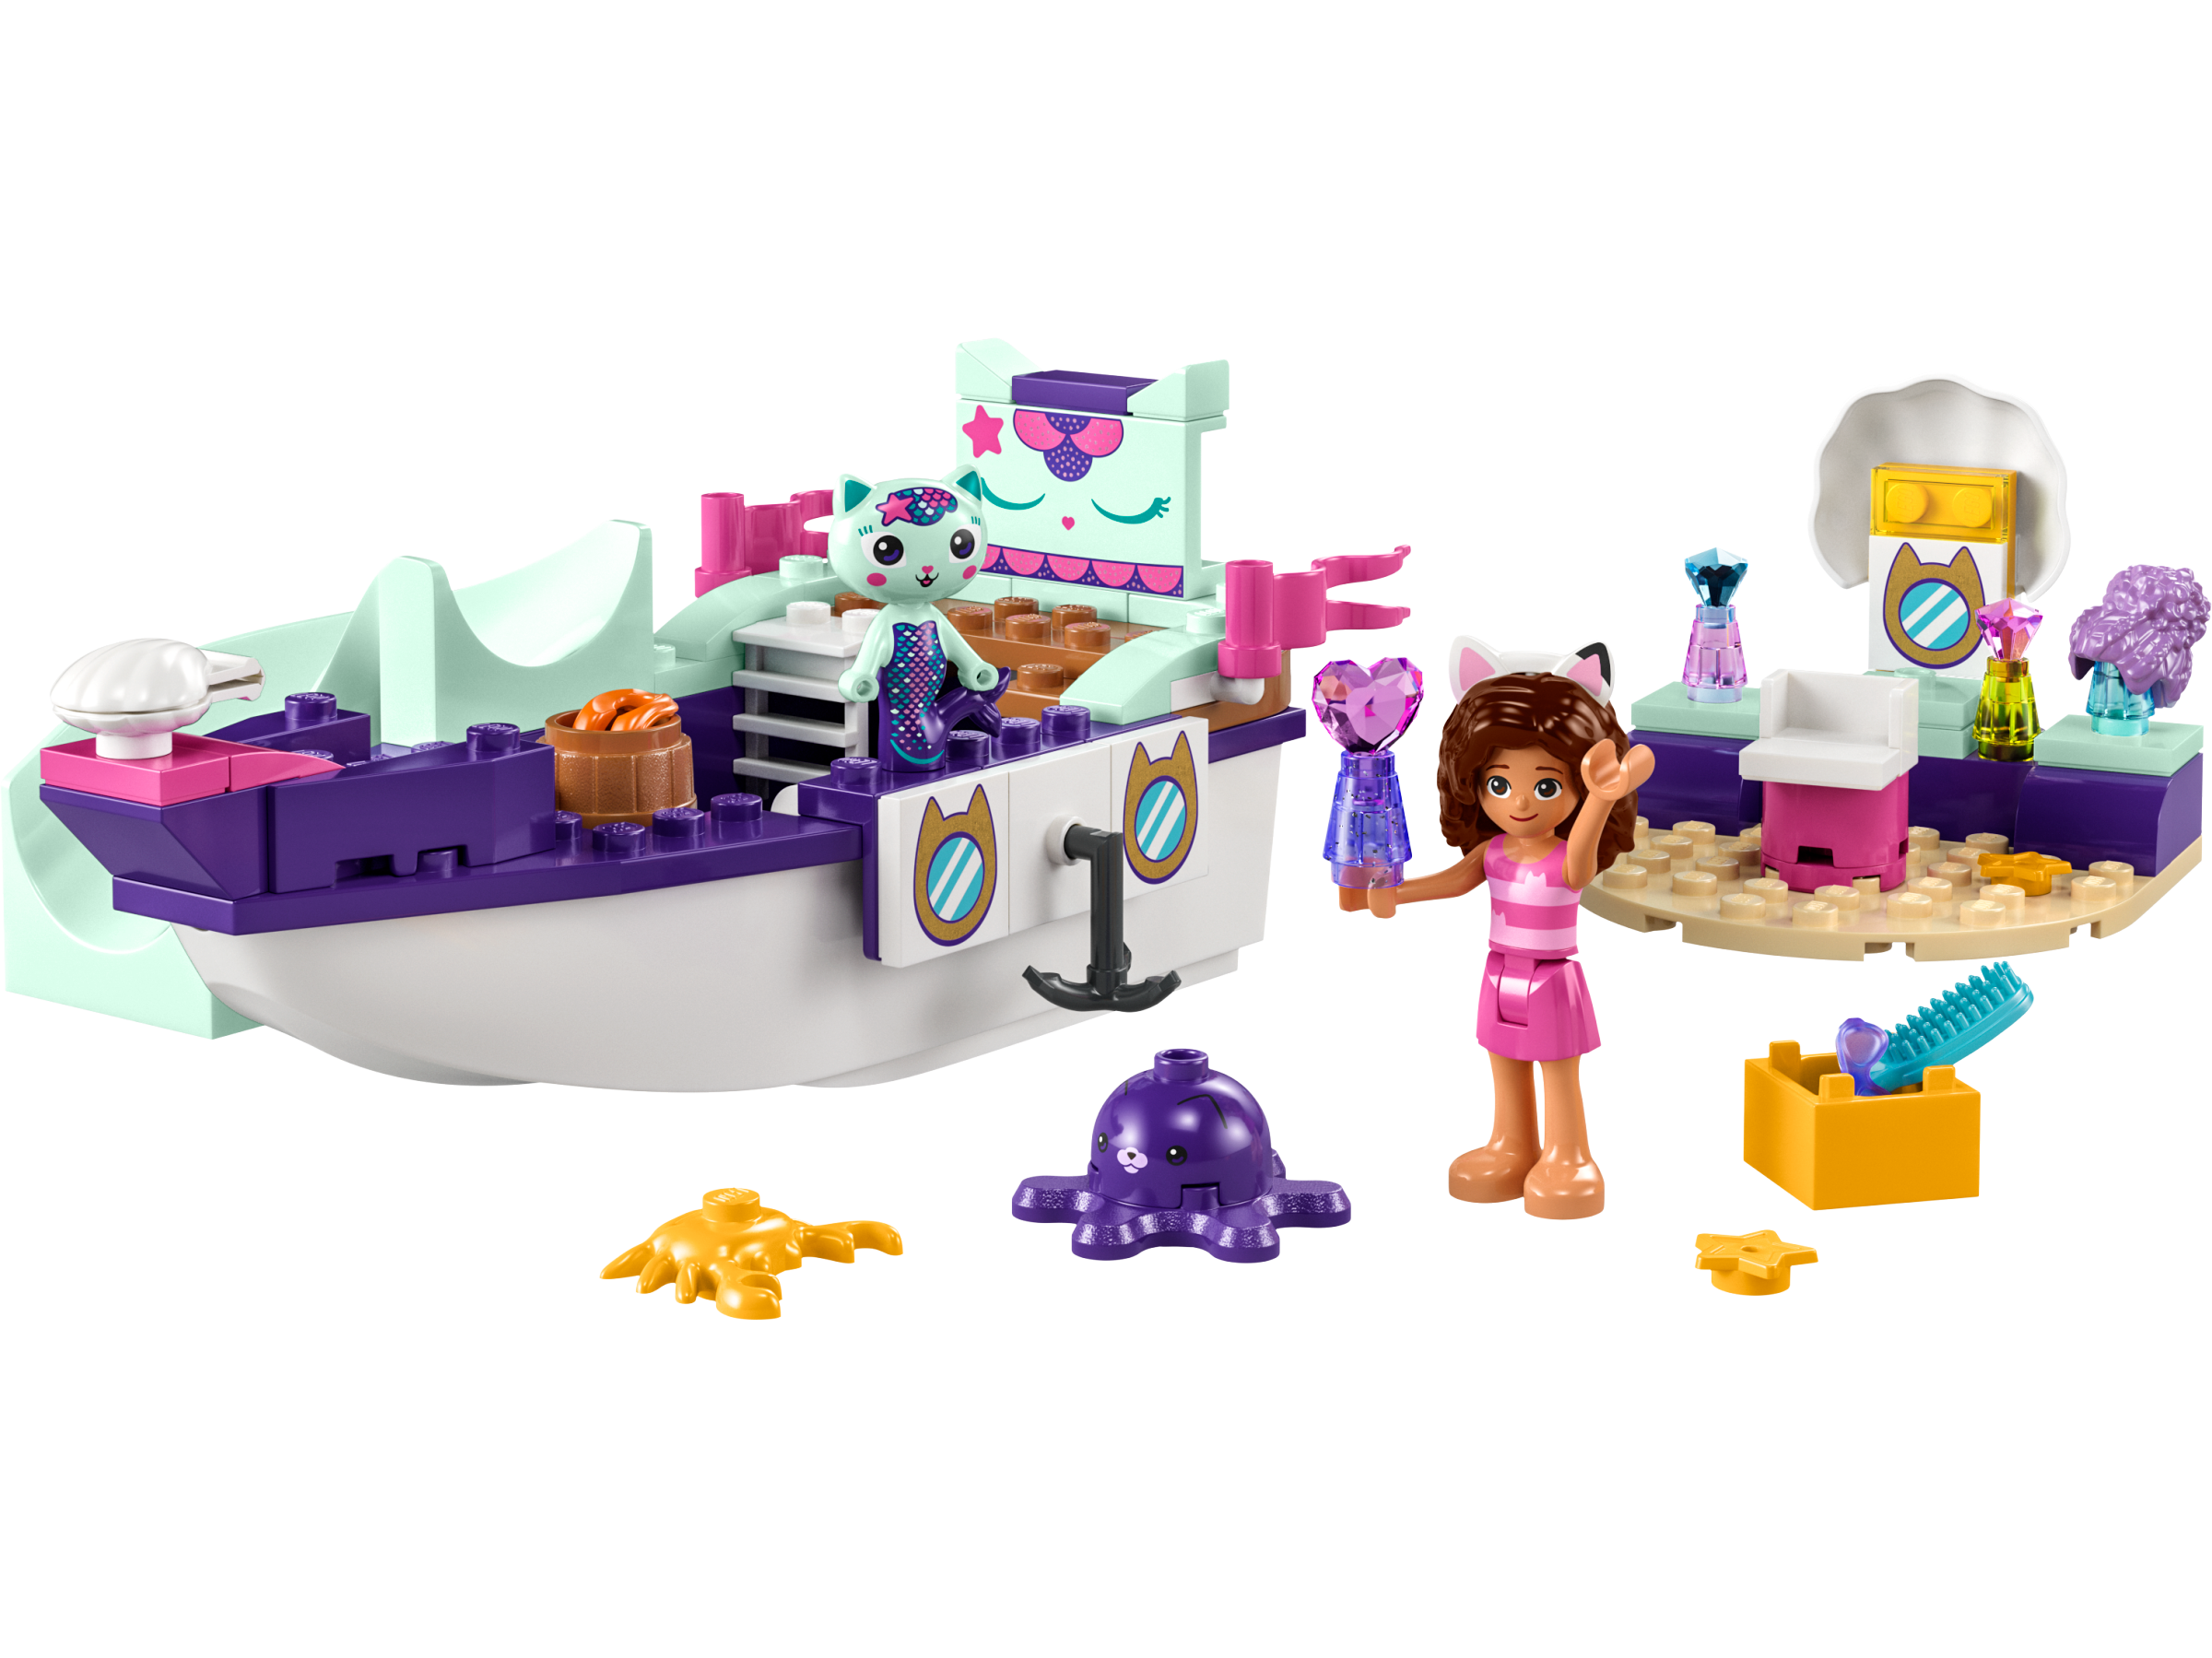 LEGO Toy Story 'Gabby Gabby' and 'Bo Peep' Minifigs - The Minifig Club